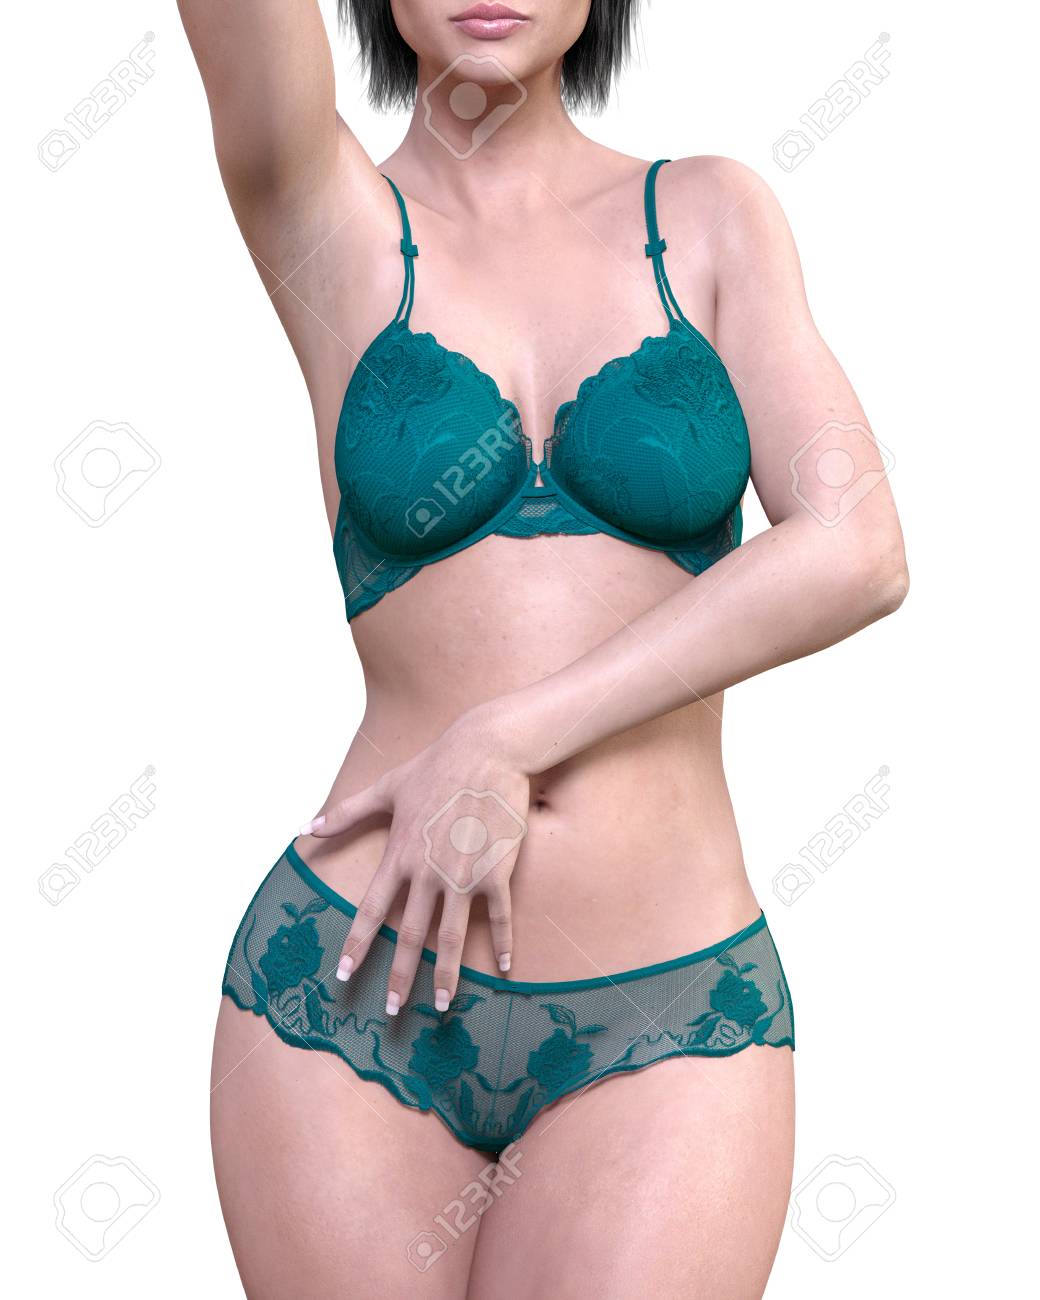 beth ingalls recommends Candid Bra And Panties